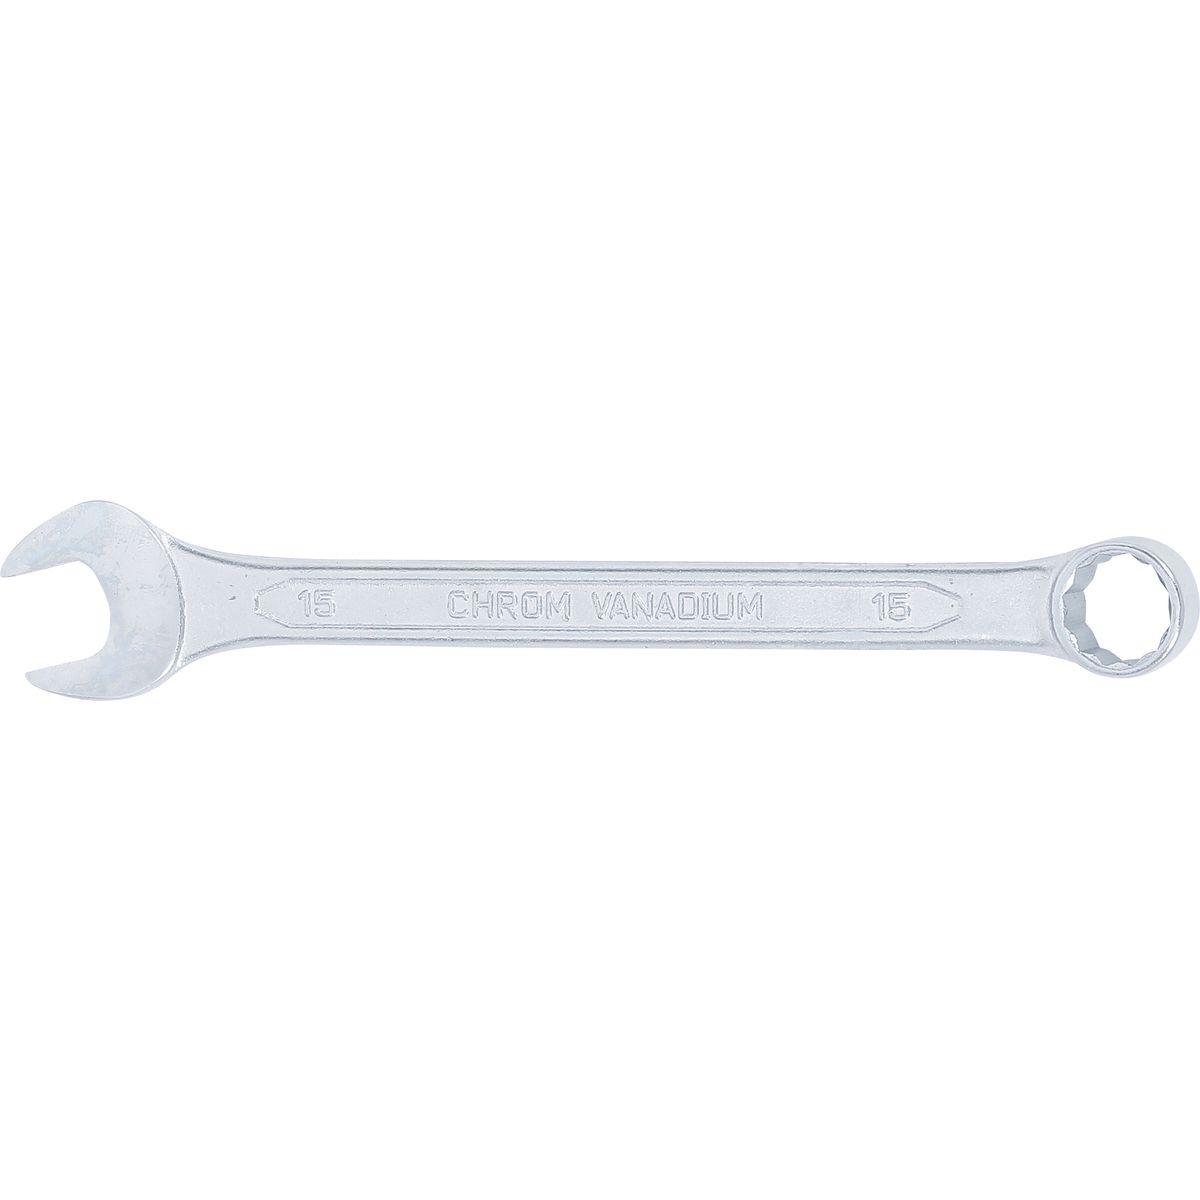 Combination Spanner | 15 mm